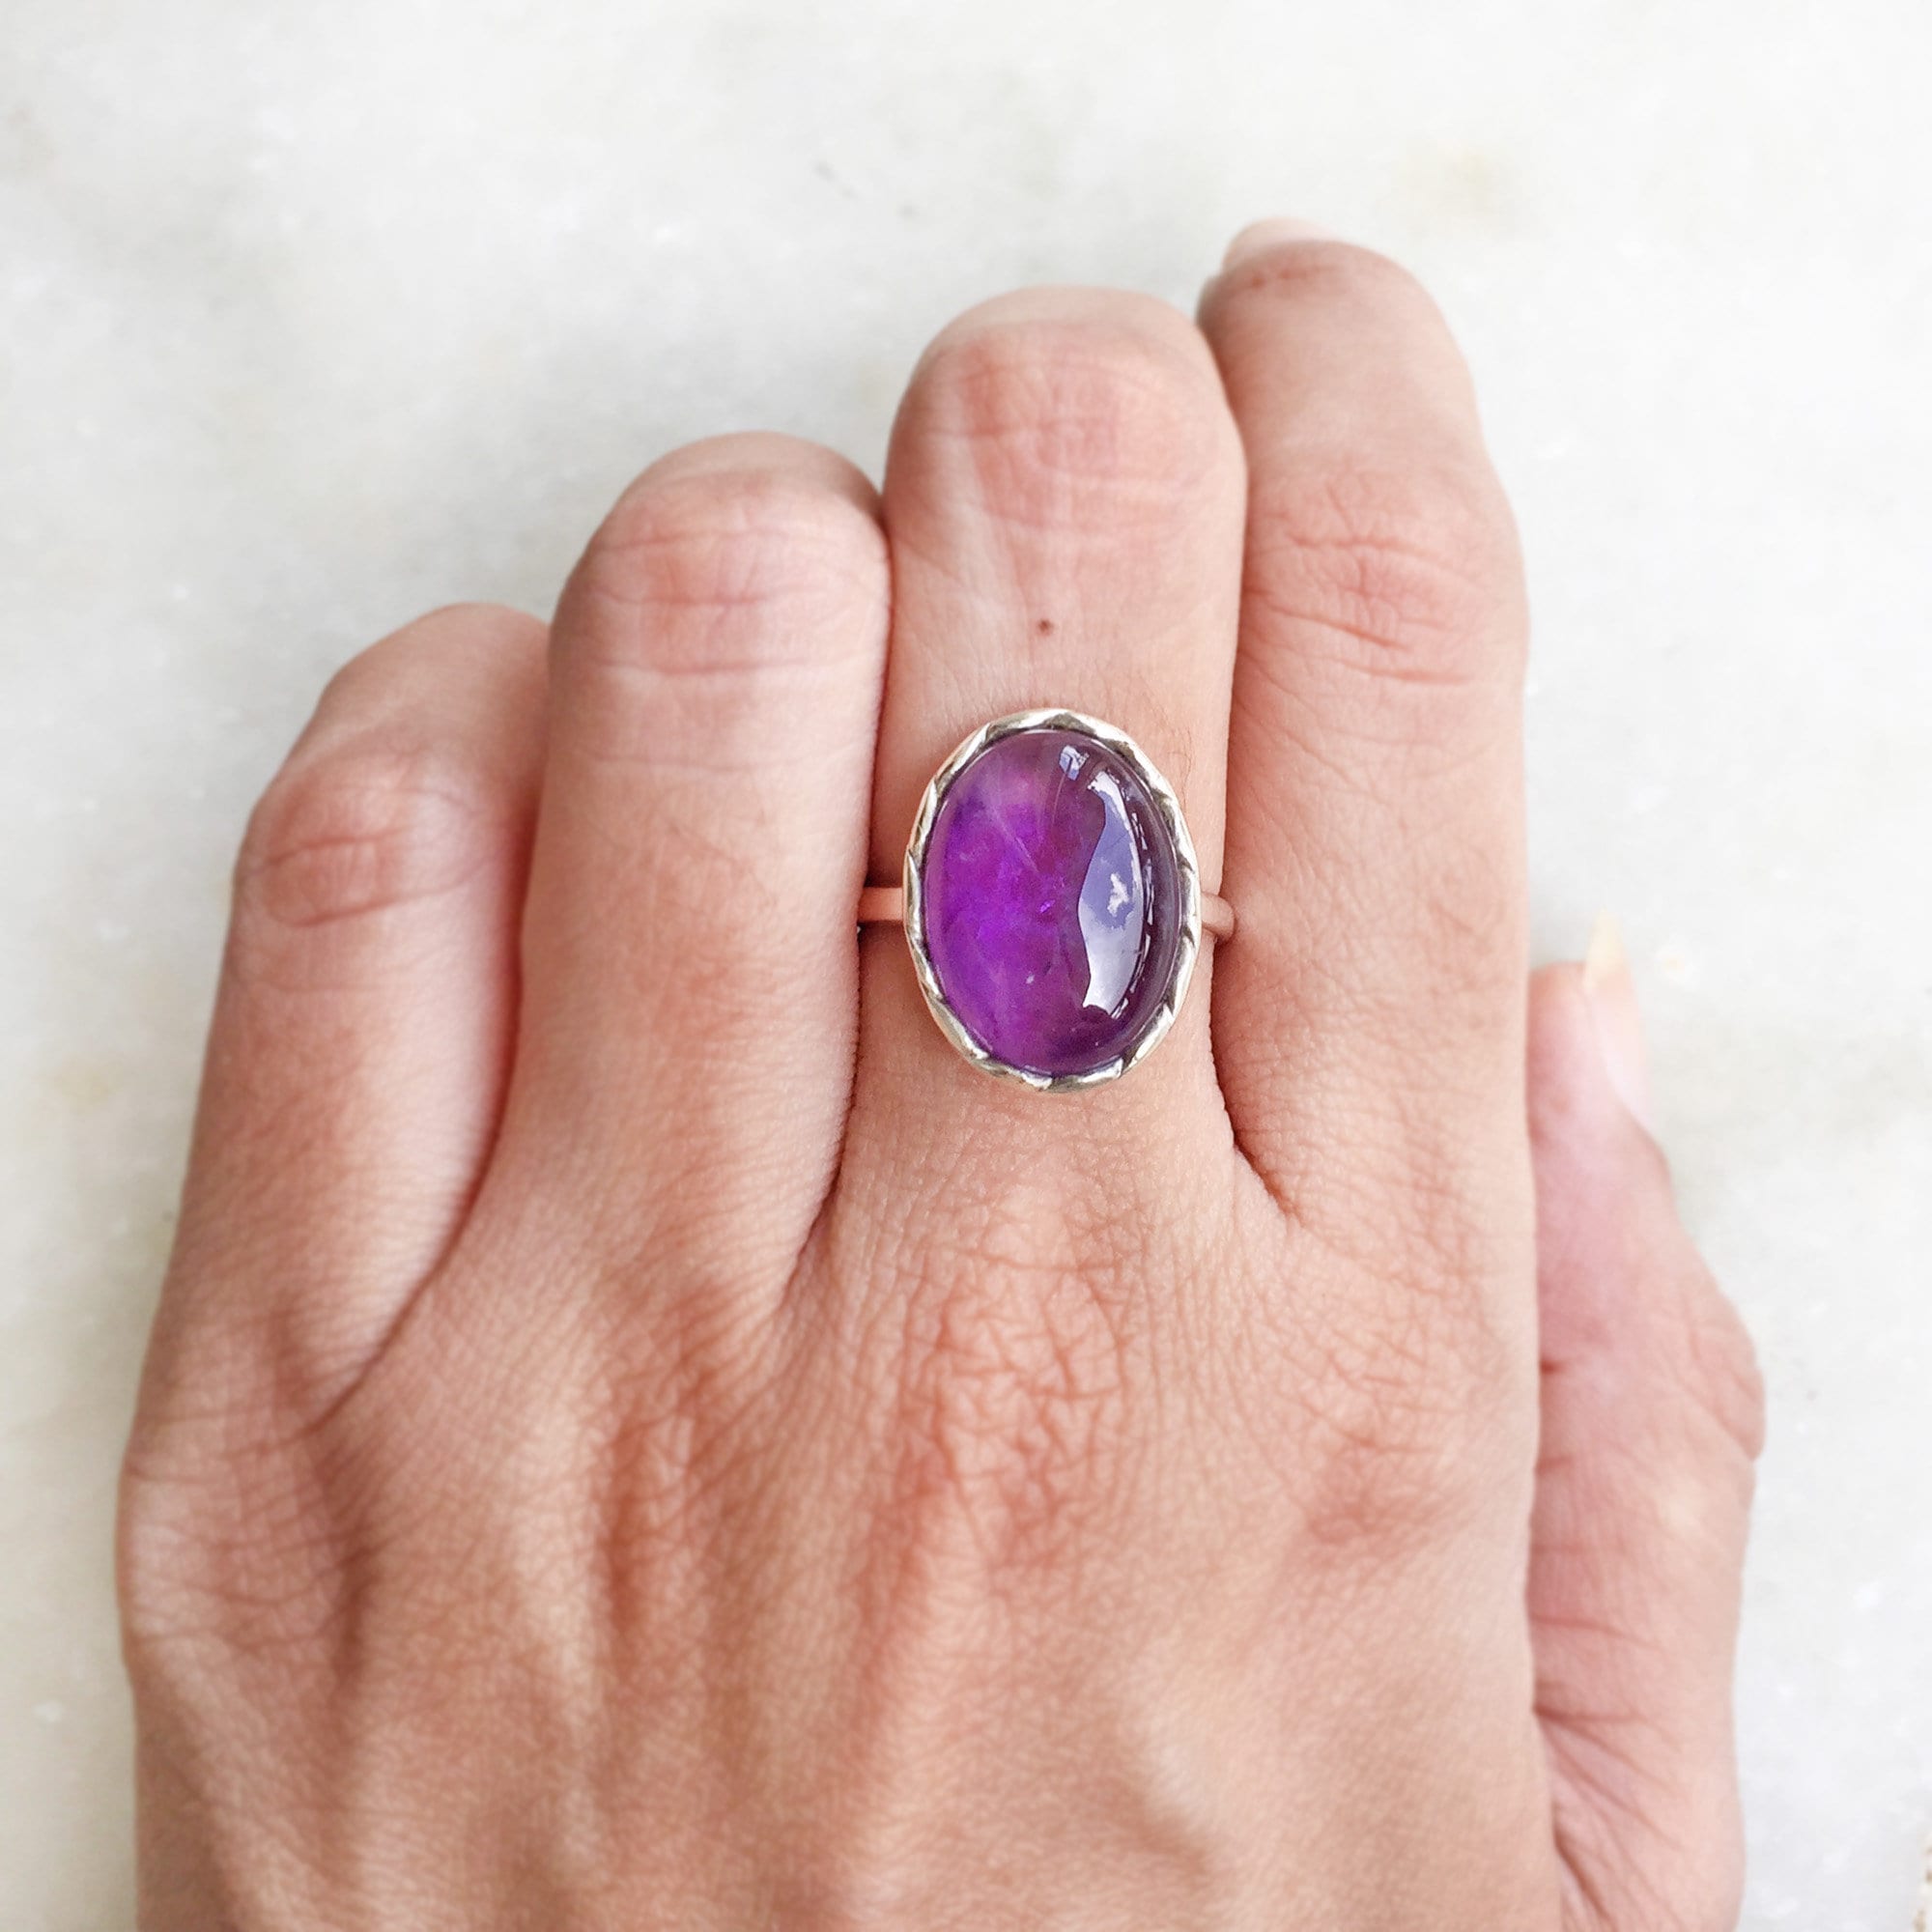 Details about  / 925 Streling Silver Amethyst Natural Gemstone Rings For All Size JL/_15